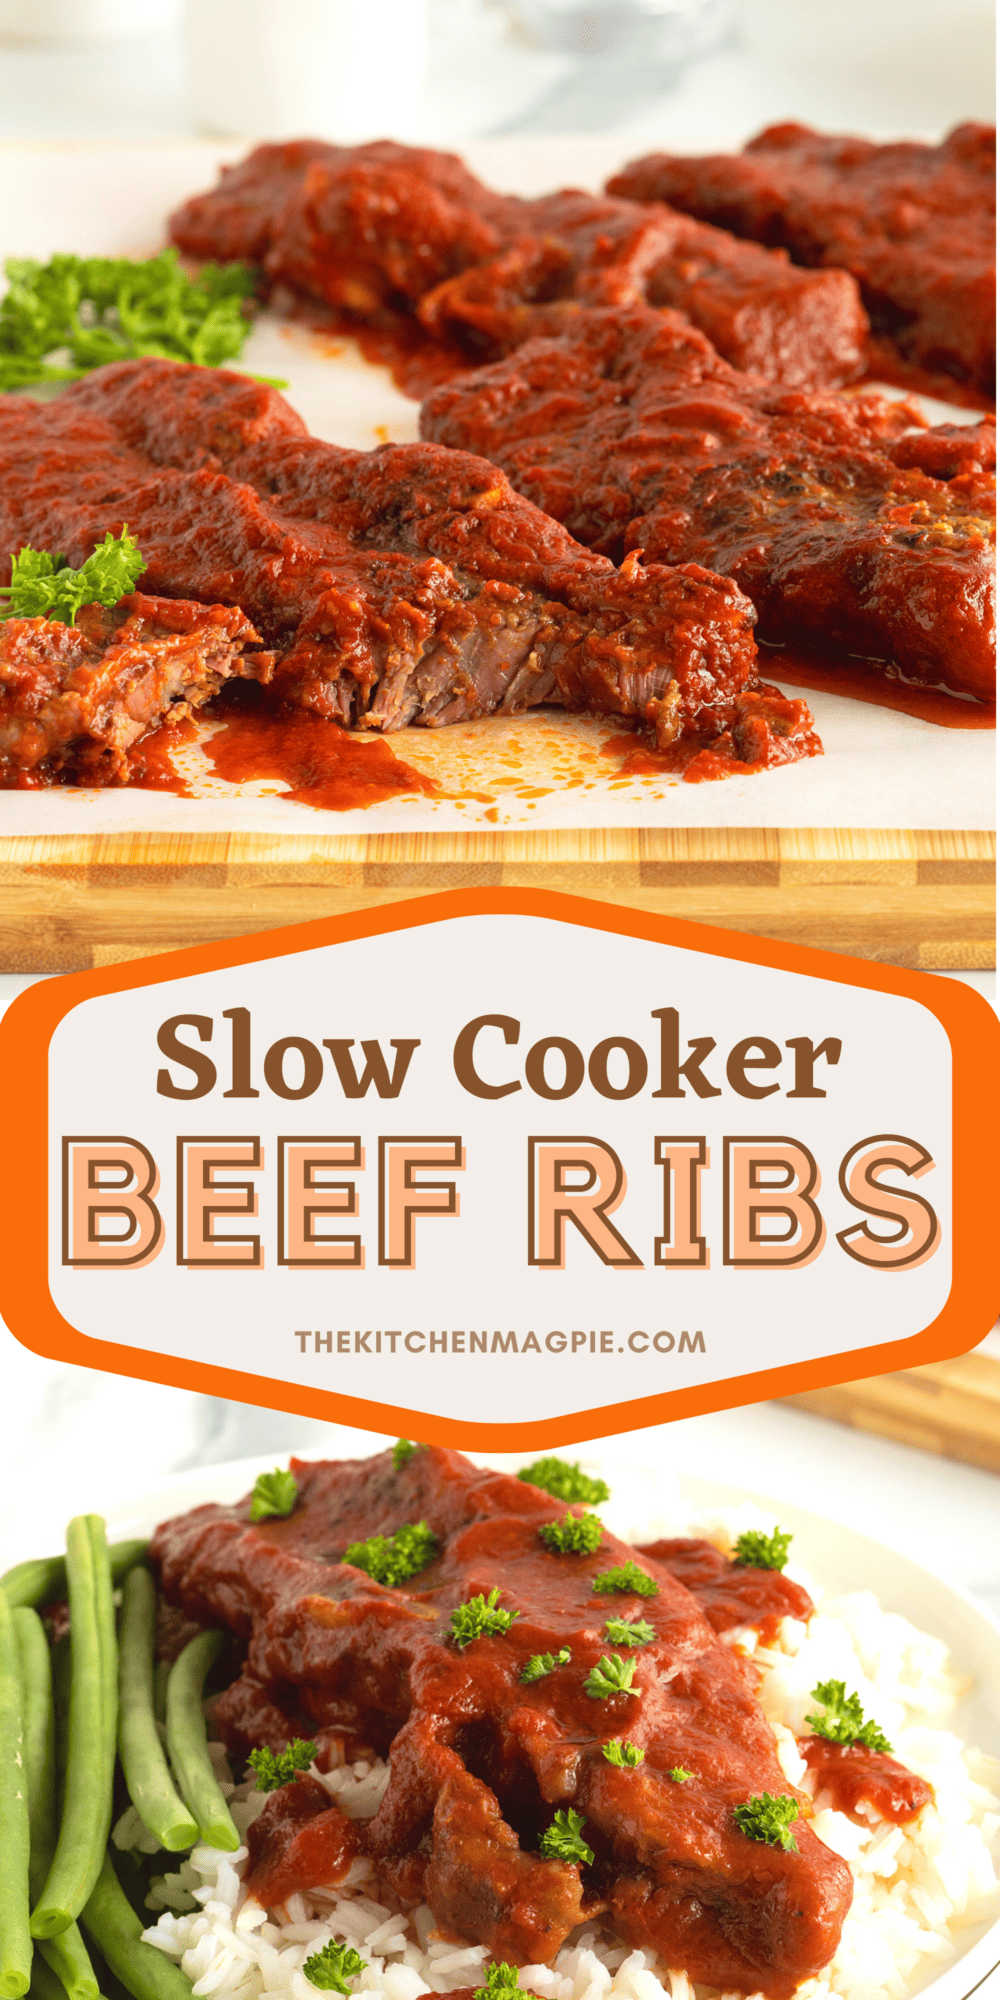  These slow cooker beef ribs are delicious, sweet  and easy cooked in the slow cooker!